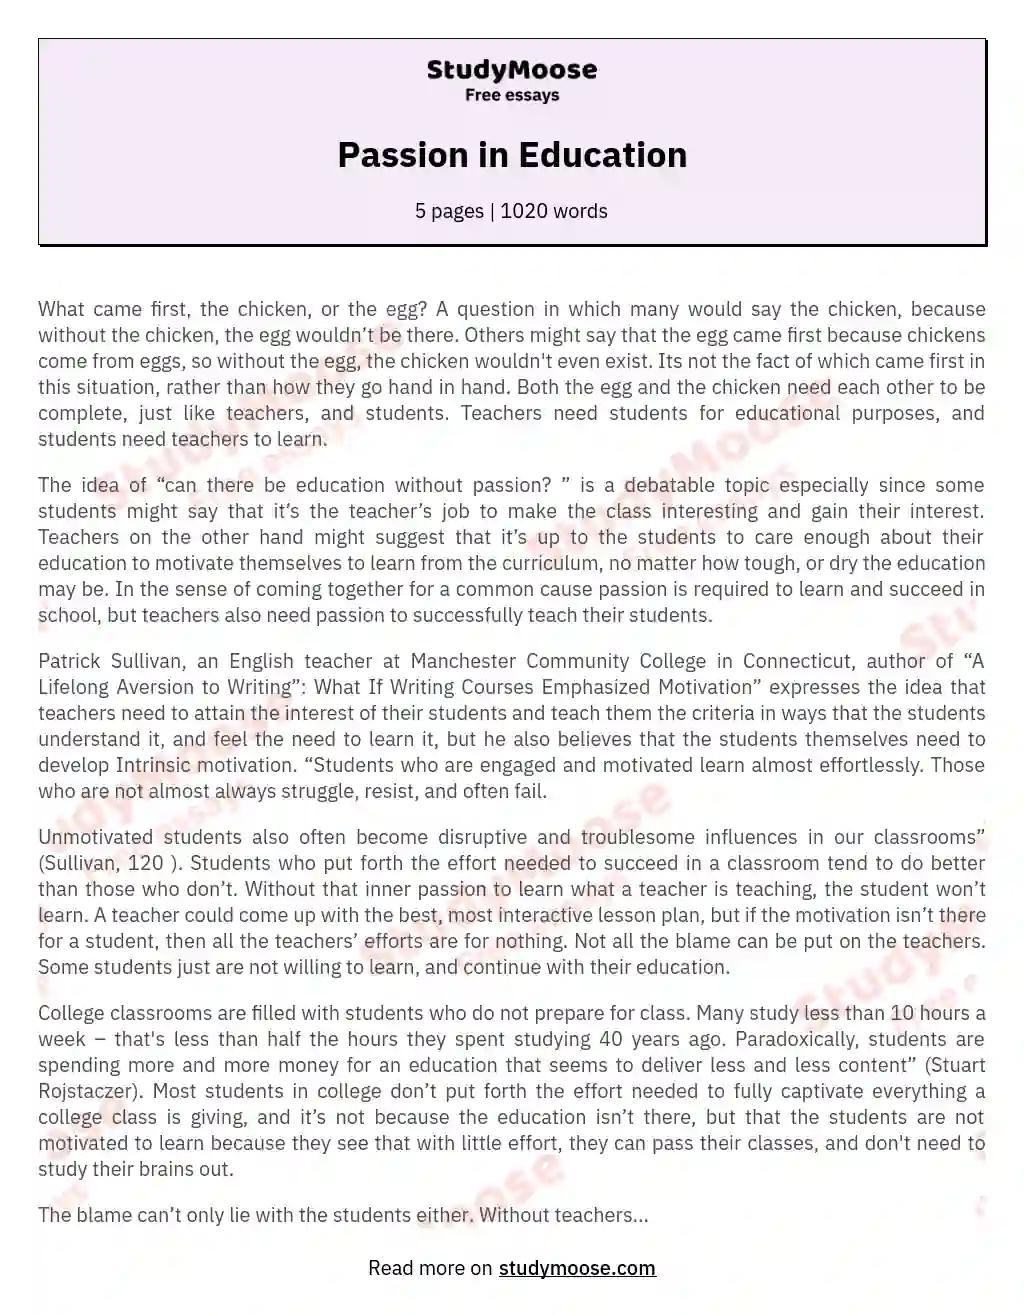 Passion in Education essay